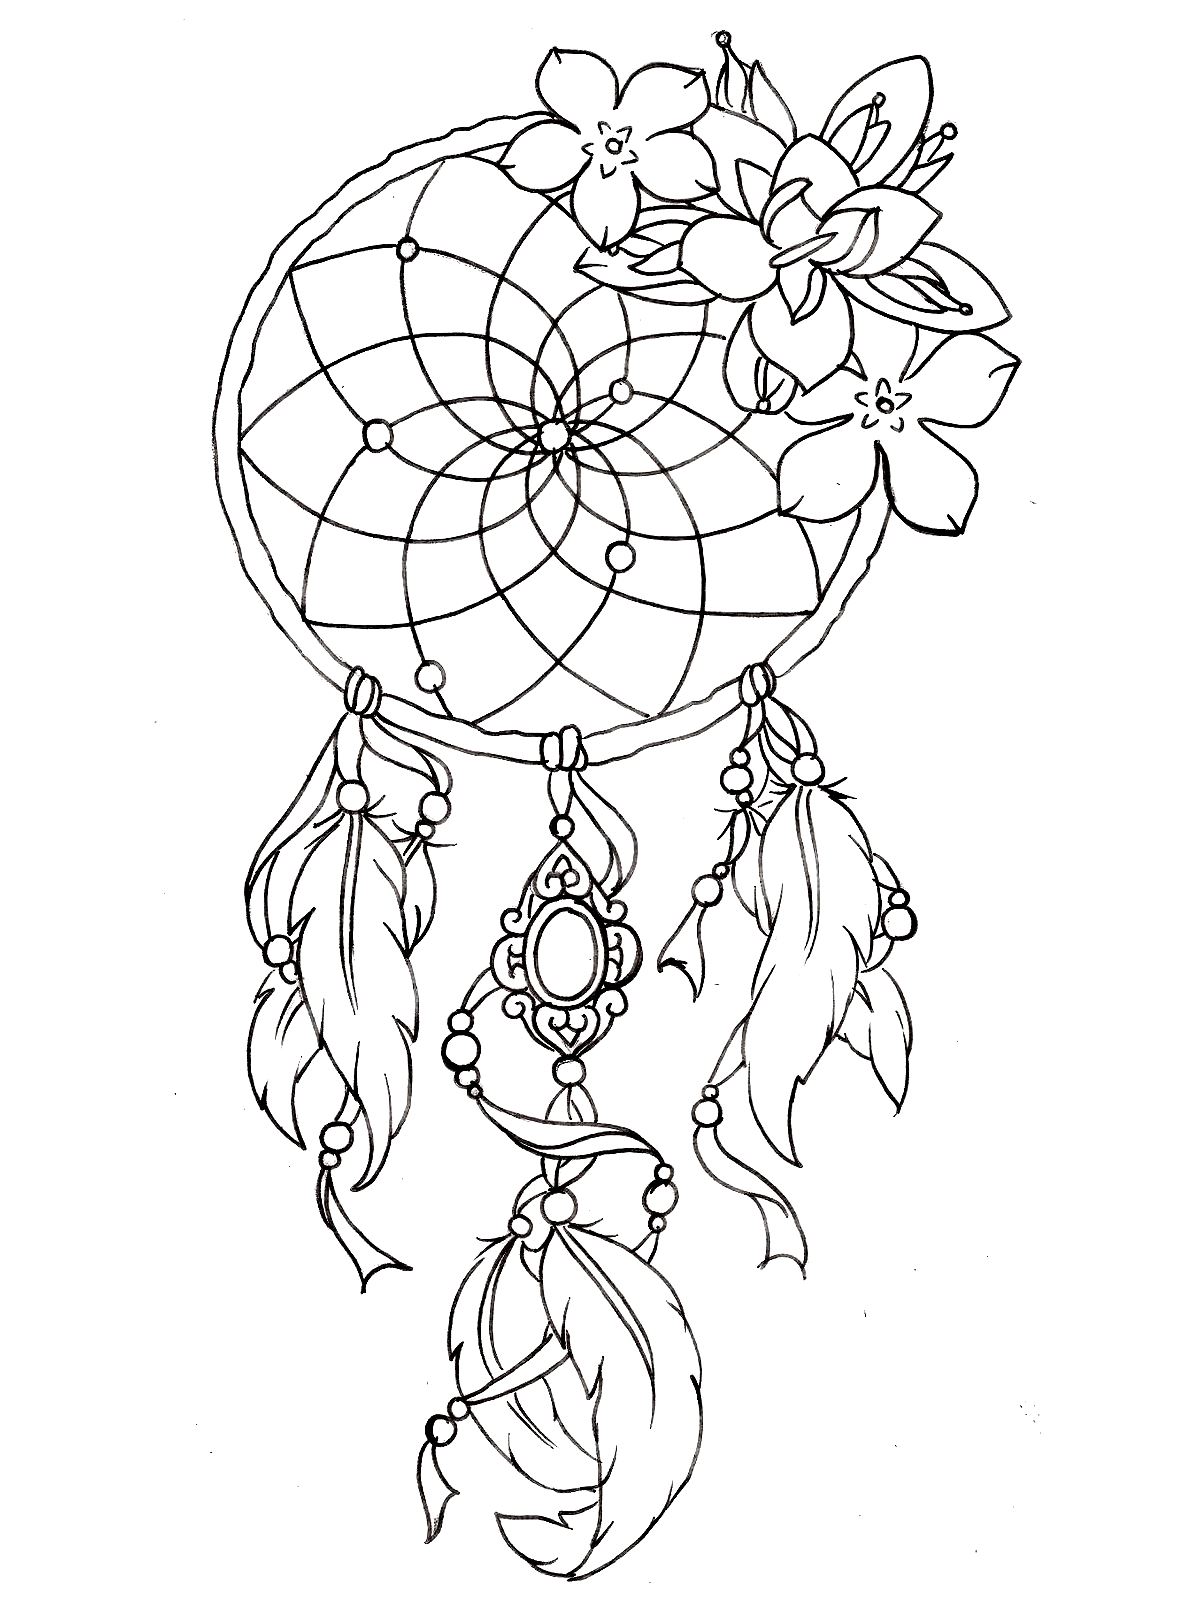 Dreamcatcher tattoo designs Tattoos Adult Coloring Pages